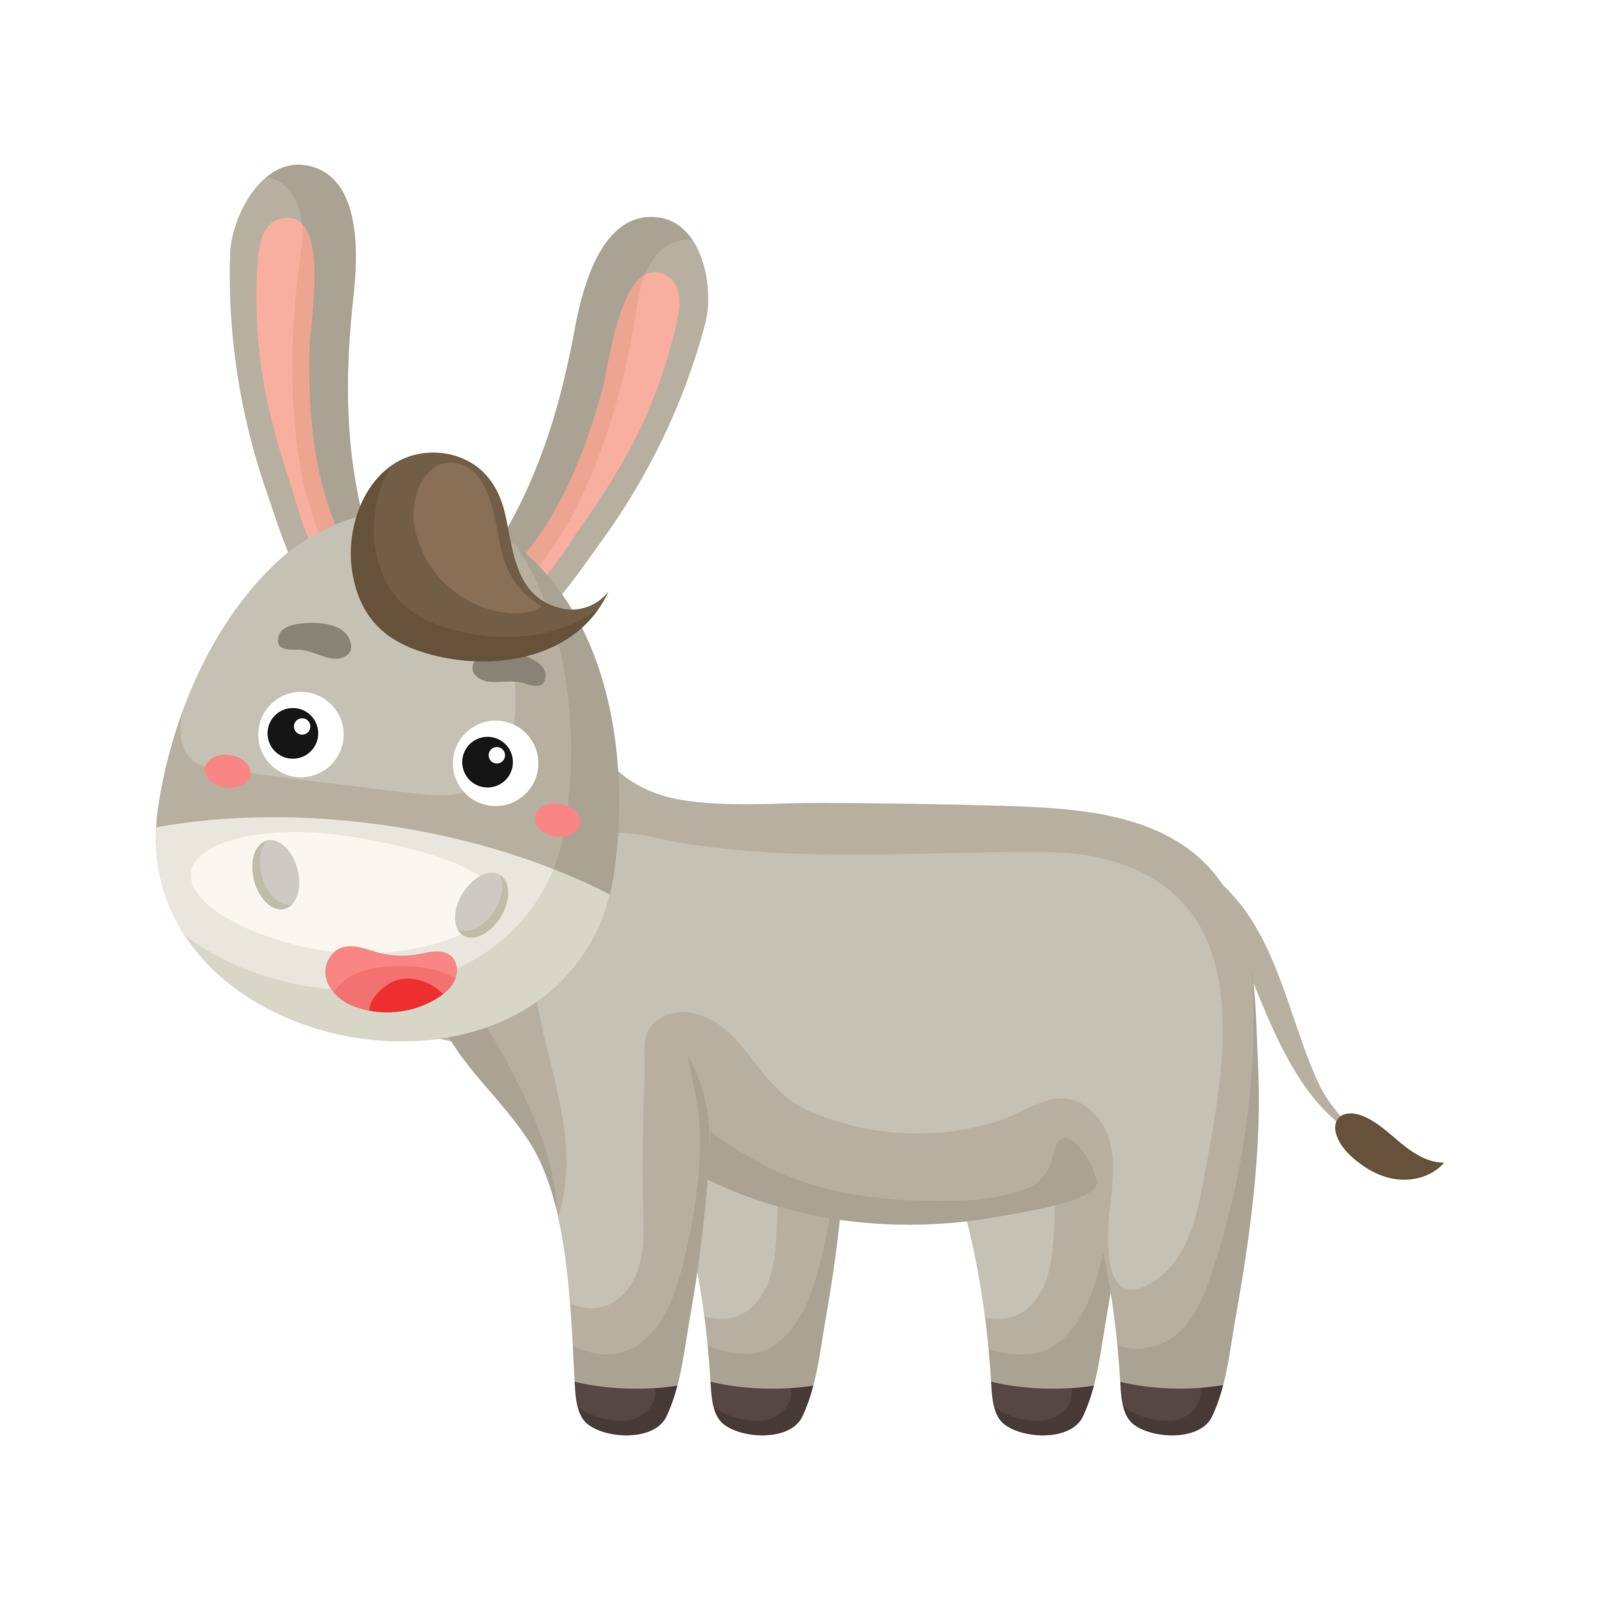 Cute funny donkey print on white background. Domestic cartoon animal character for design of album, scrapbook, greeting card, invitation, wall decor. Flat colorful vector stock illustration.